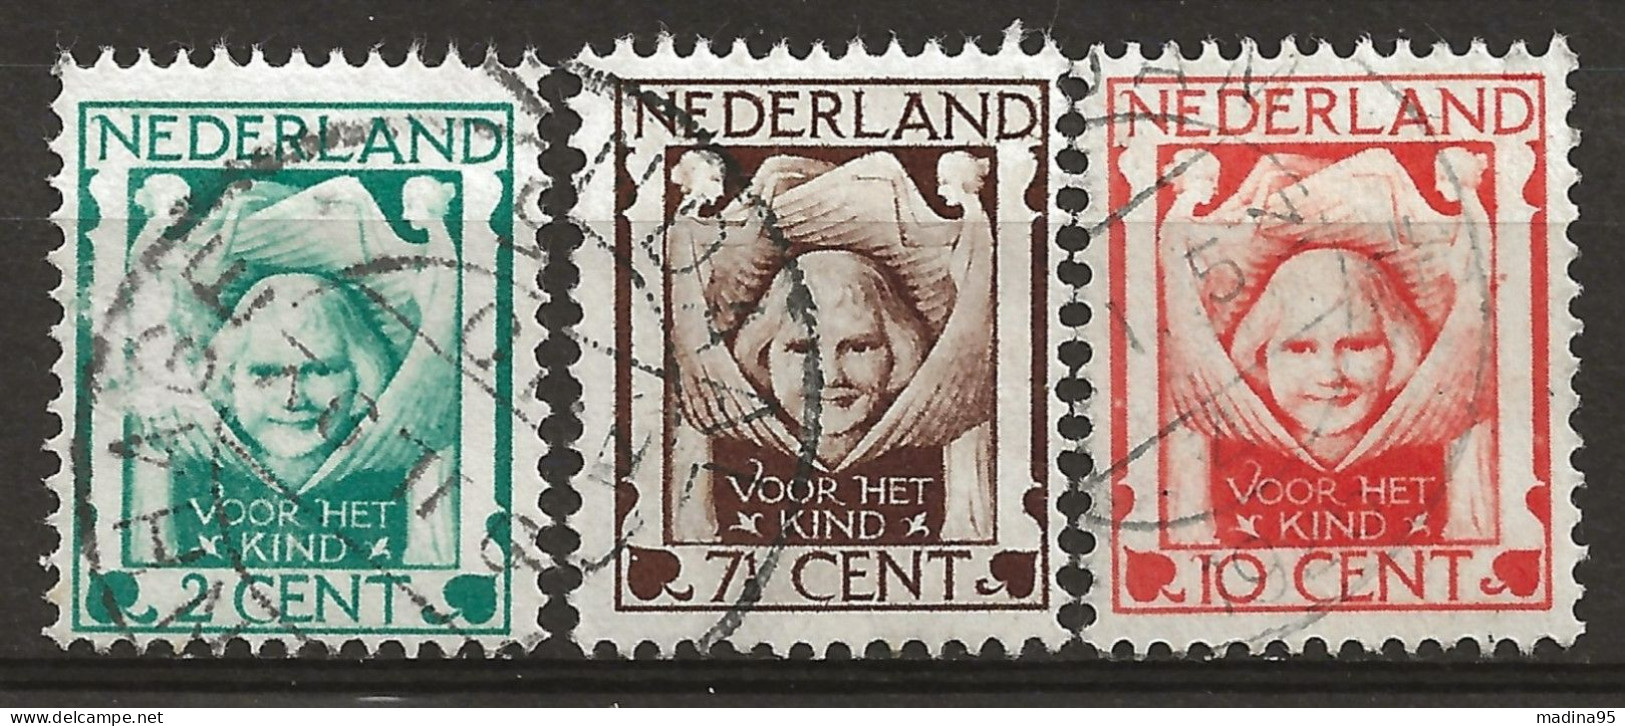 PAYS-BAS: Obl., N° YT 159 à 161, Série, TB - Used Stamps